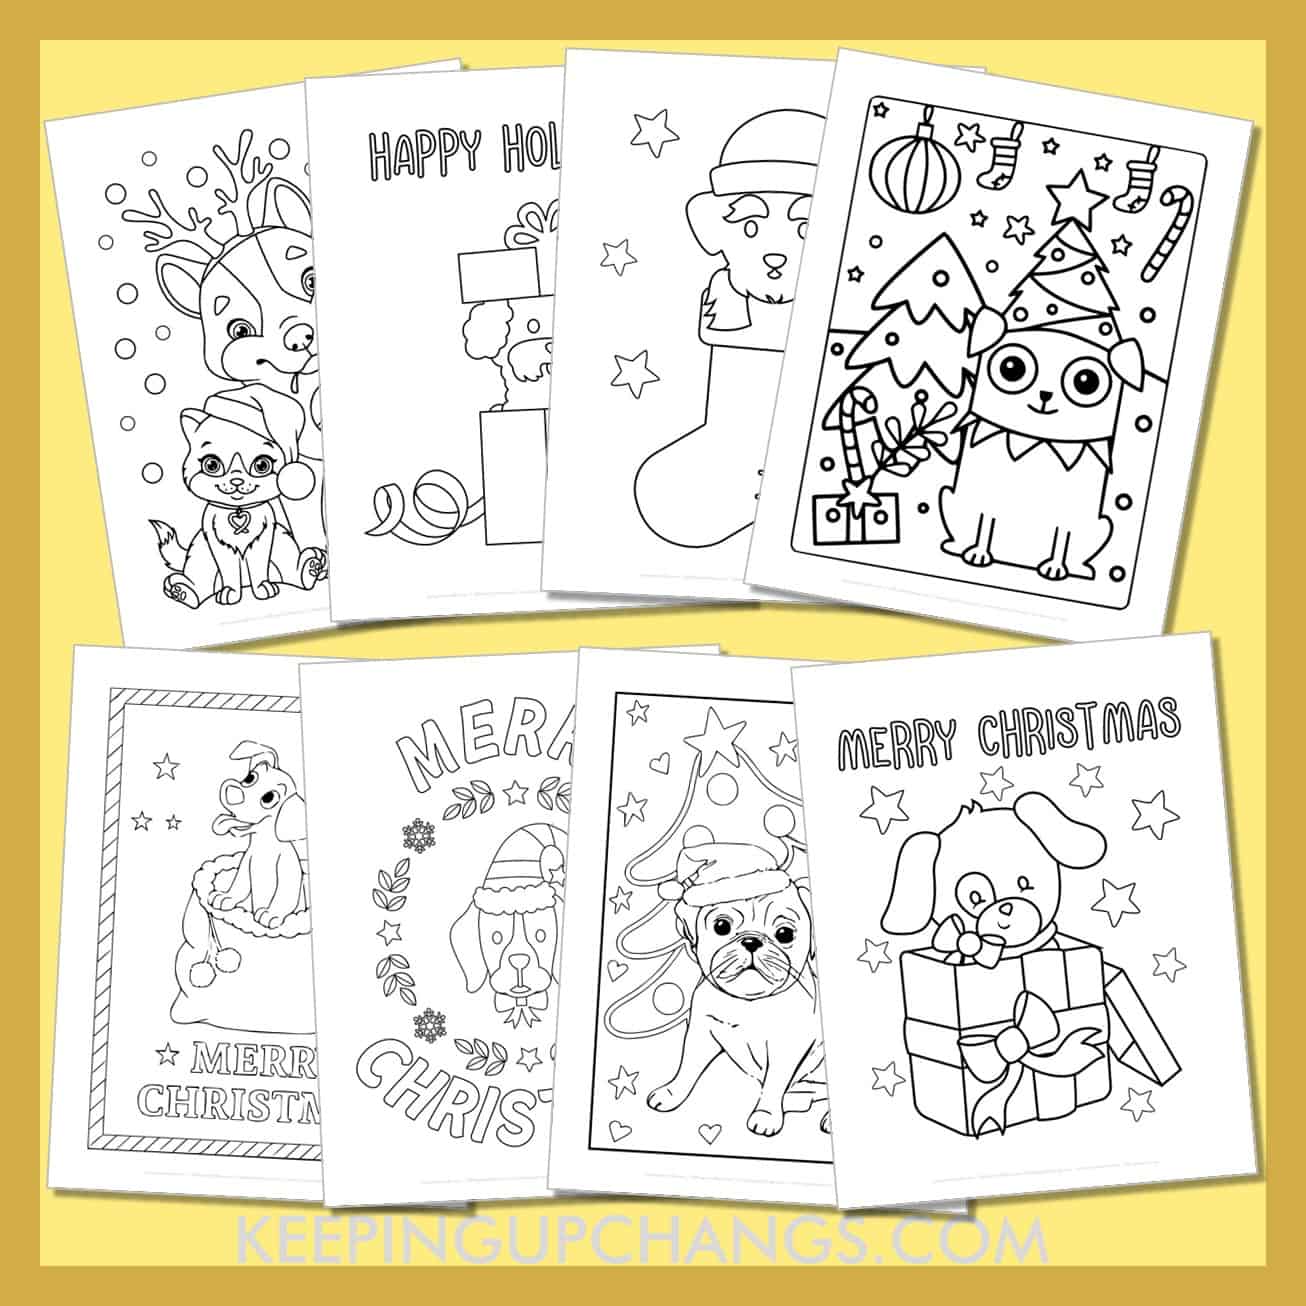 cute christmas dog colouring sheets including golden retriever, chihuahua, poodle, pug, dalmation, and more.